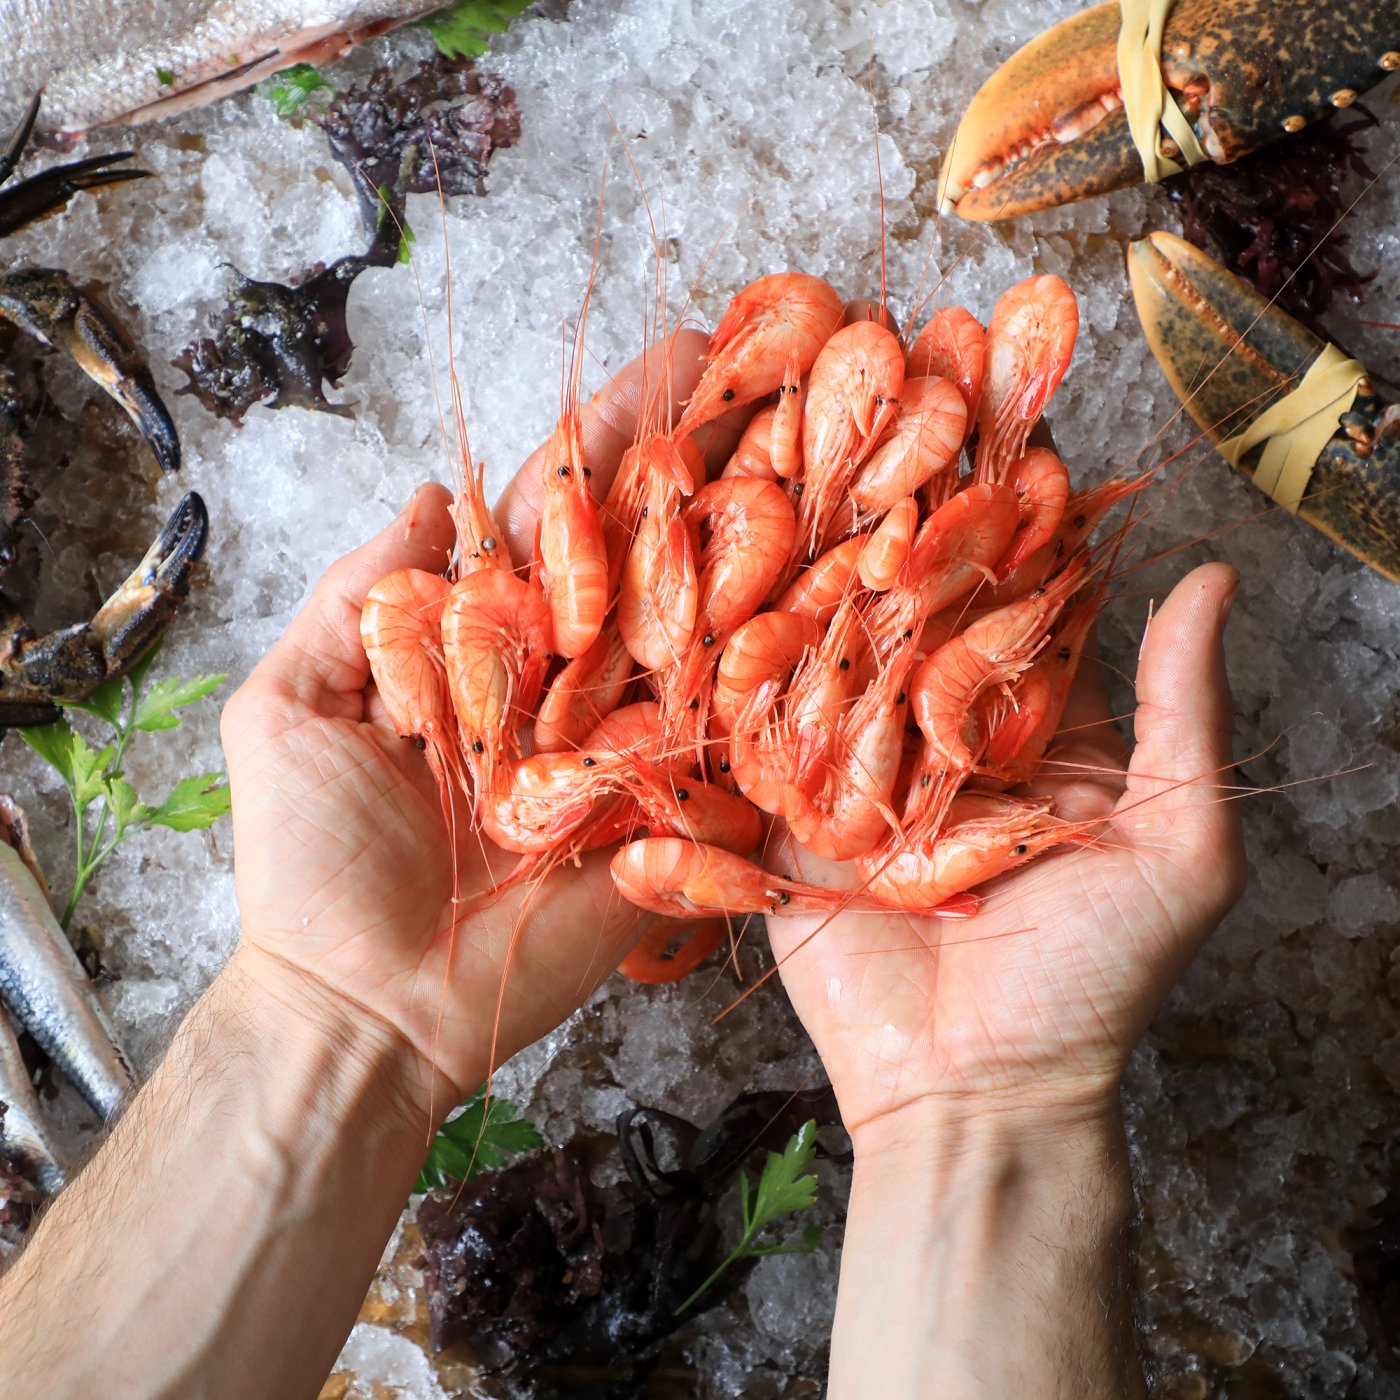 A handful of fresh tiger prawns grabbed from a fishmonger's freezer, surrounded by crabs, lobster and small fish